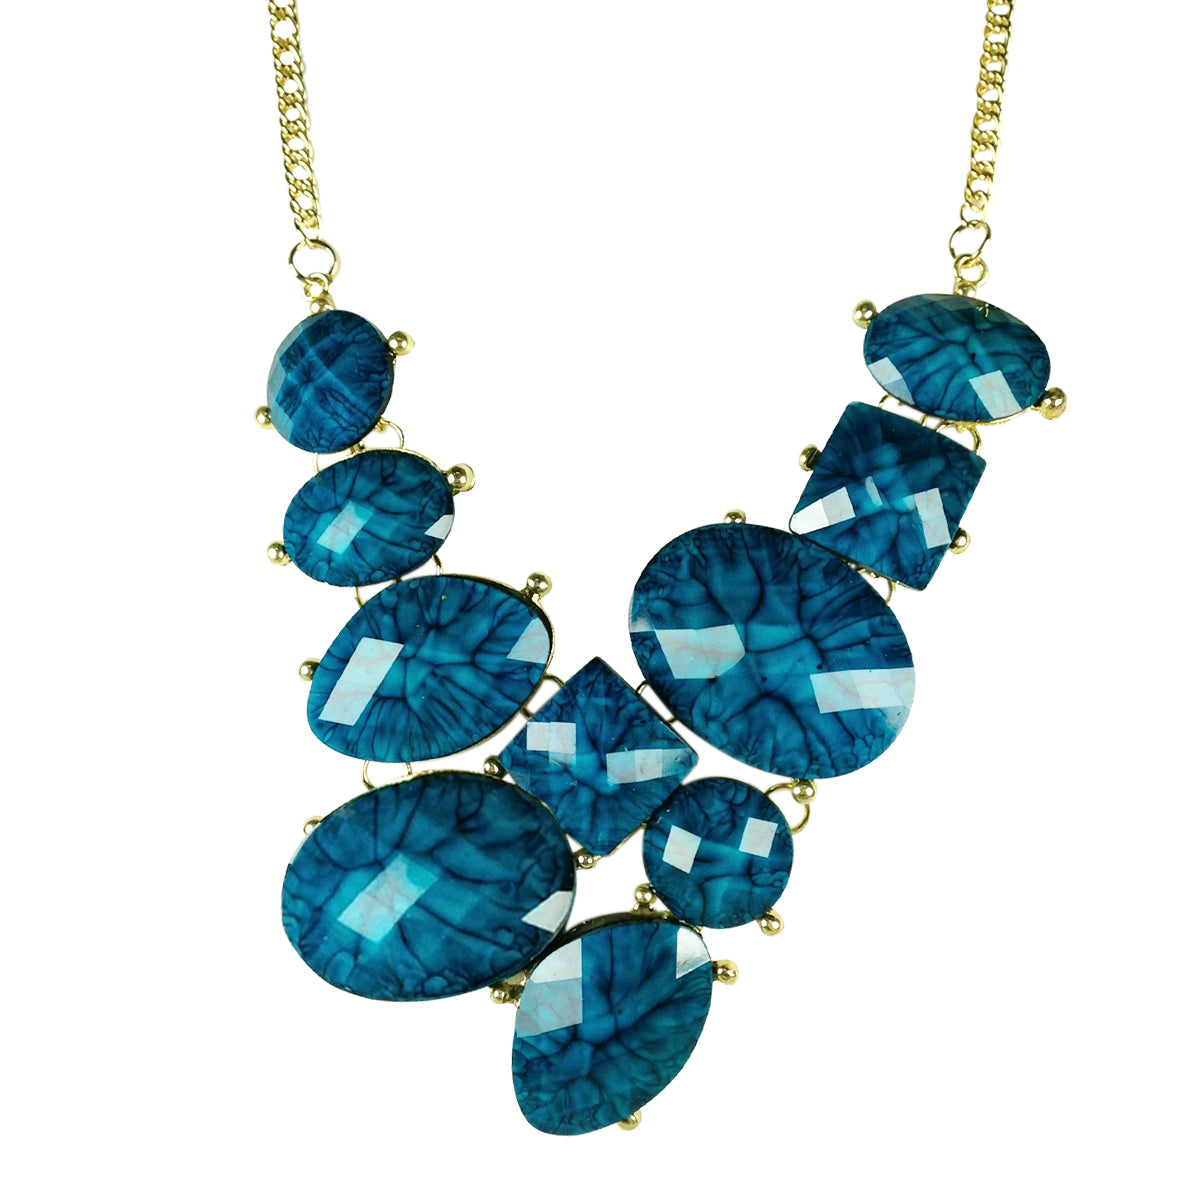 Wrapables Faceted Resin Bubble Bib Statement Necklace